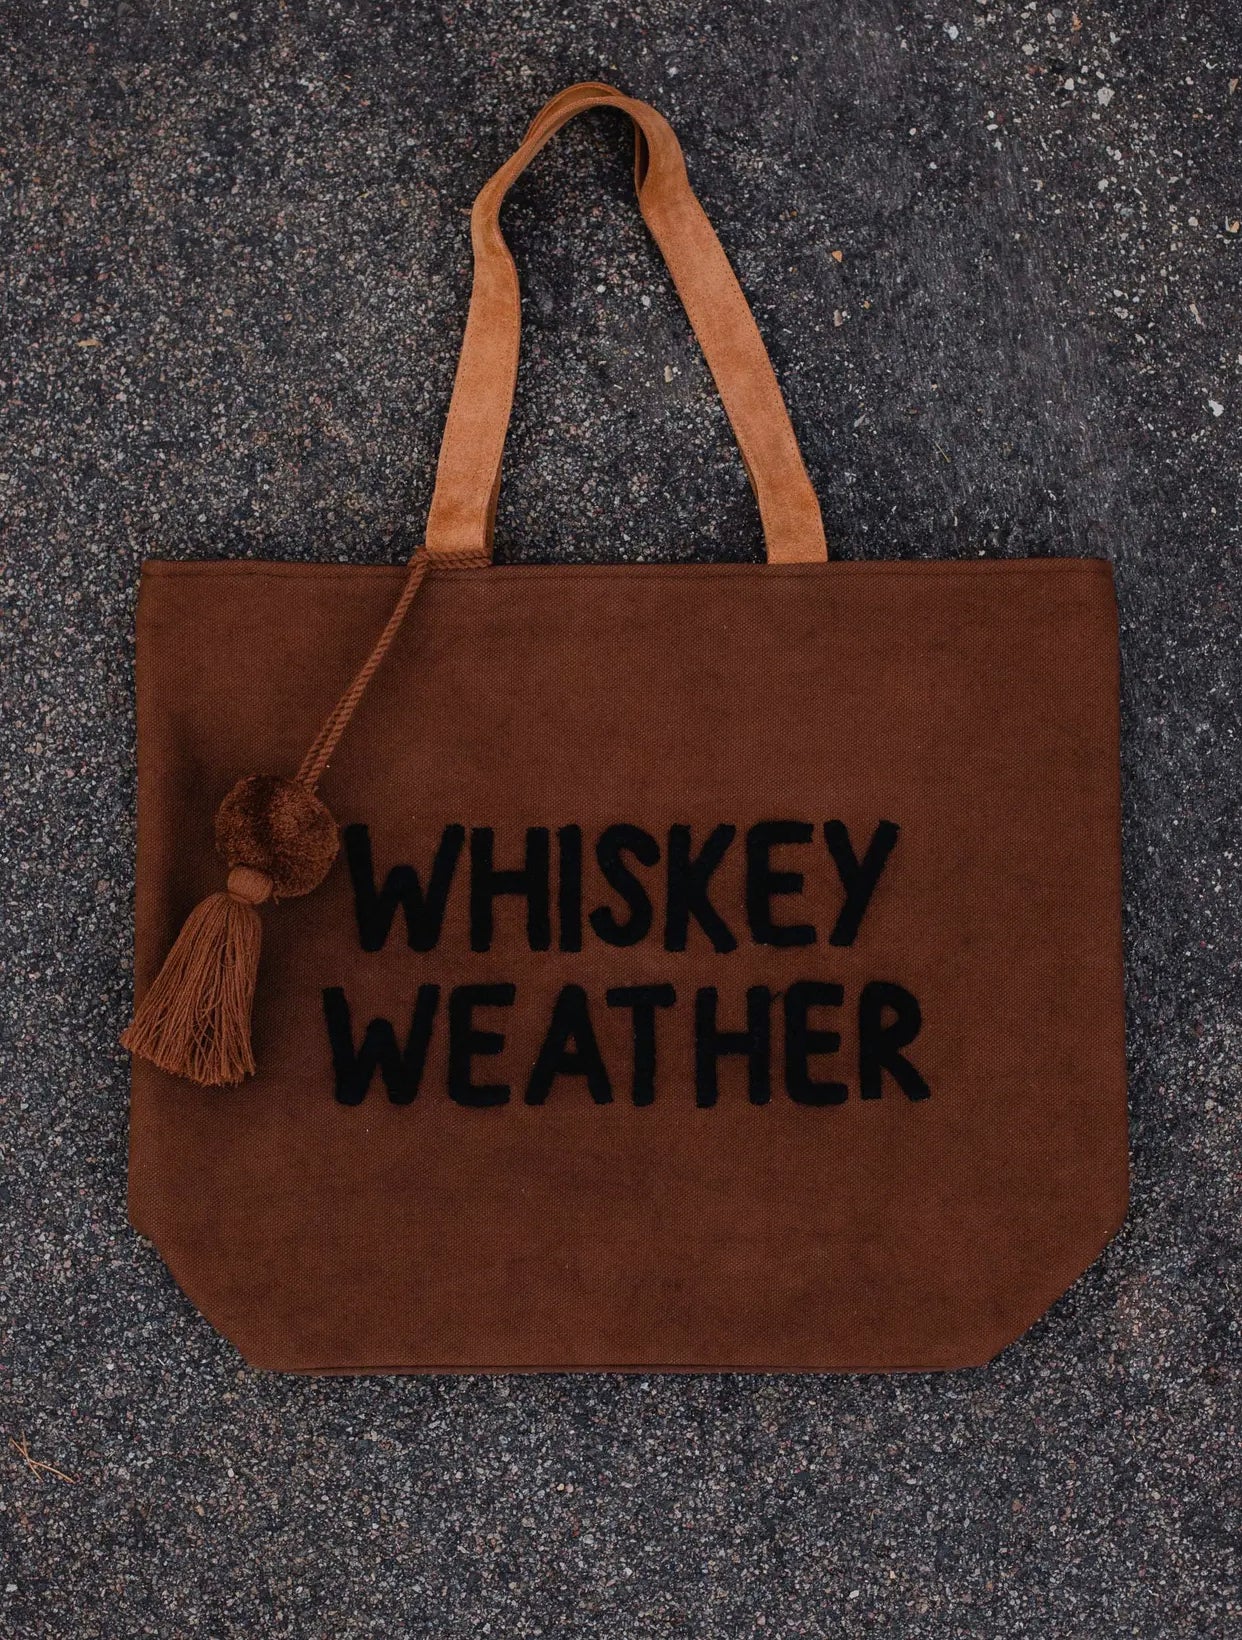 Whiskey weather Tote